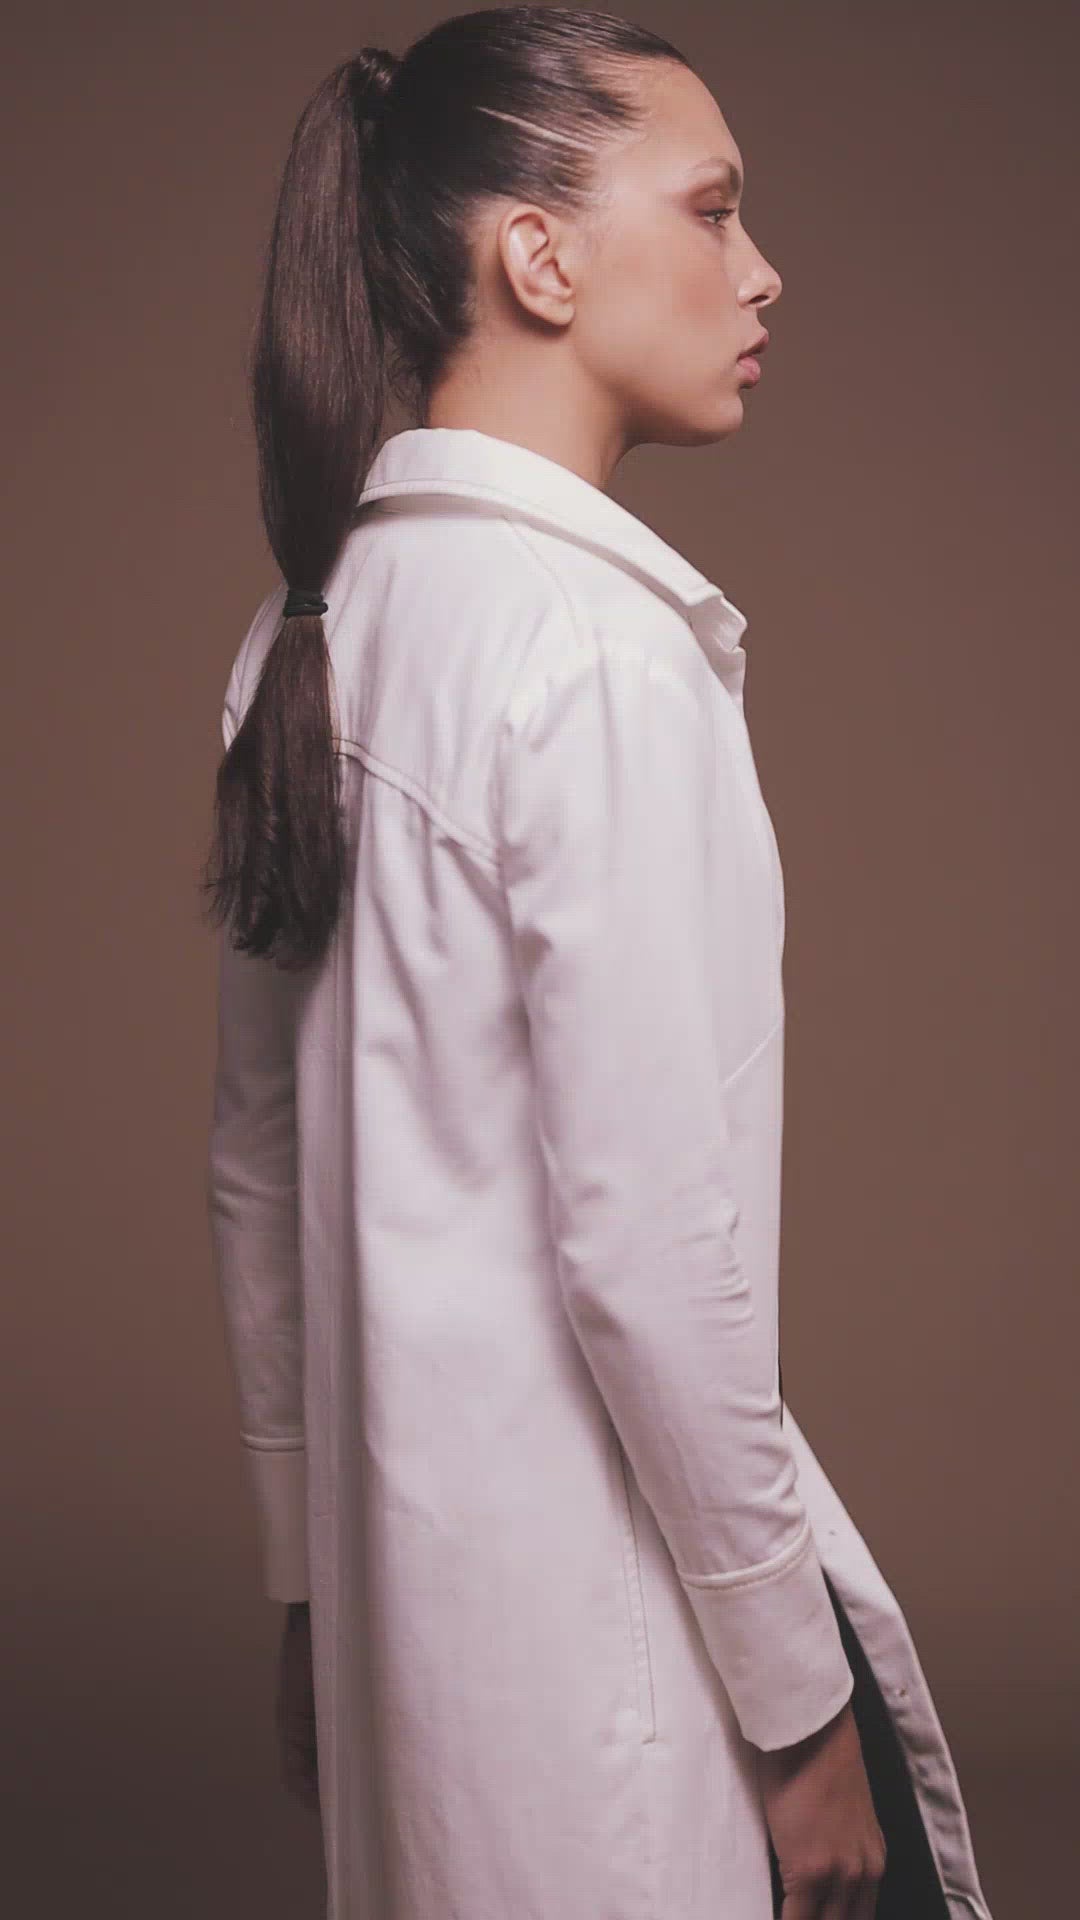 Video of white Organic Cotton Shirt Dress made by Organique, a sustainable clothing brand.